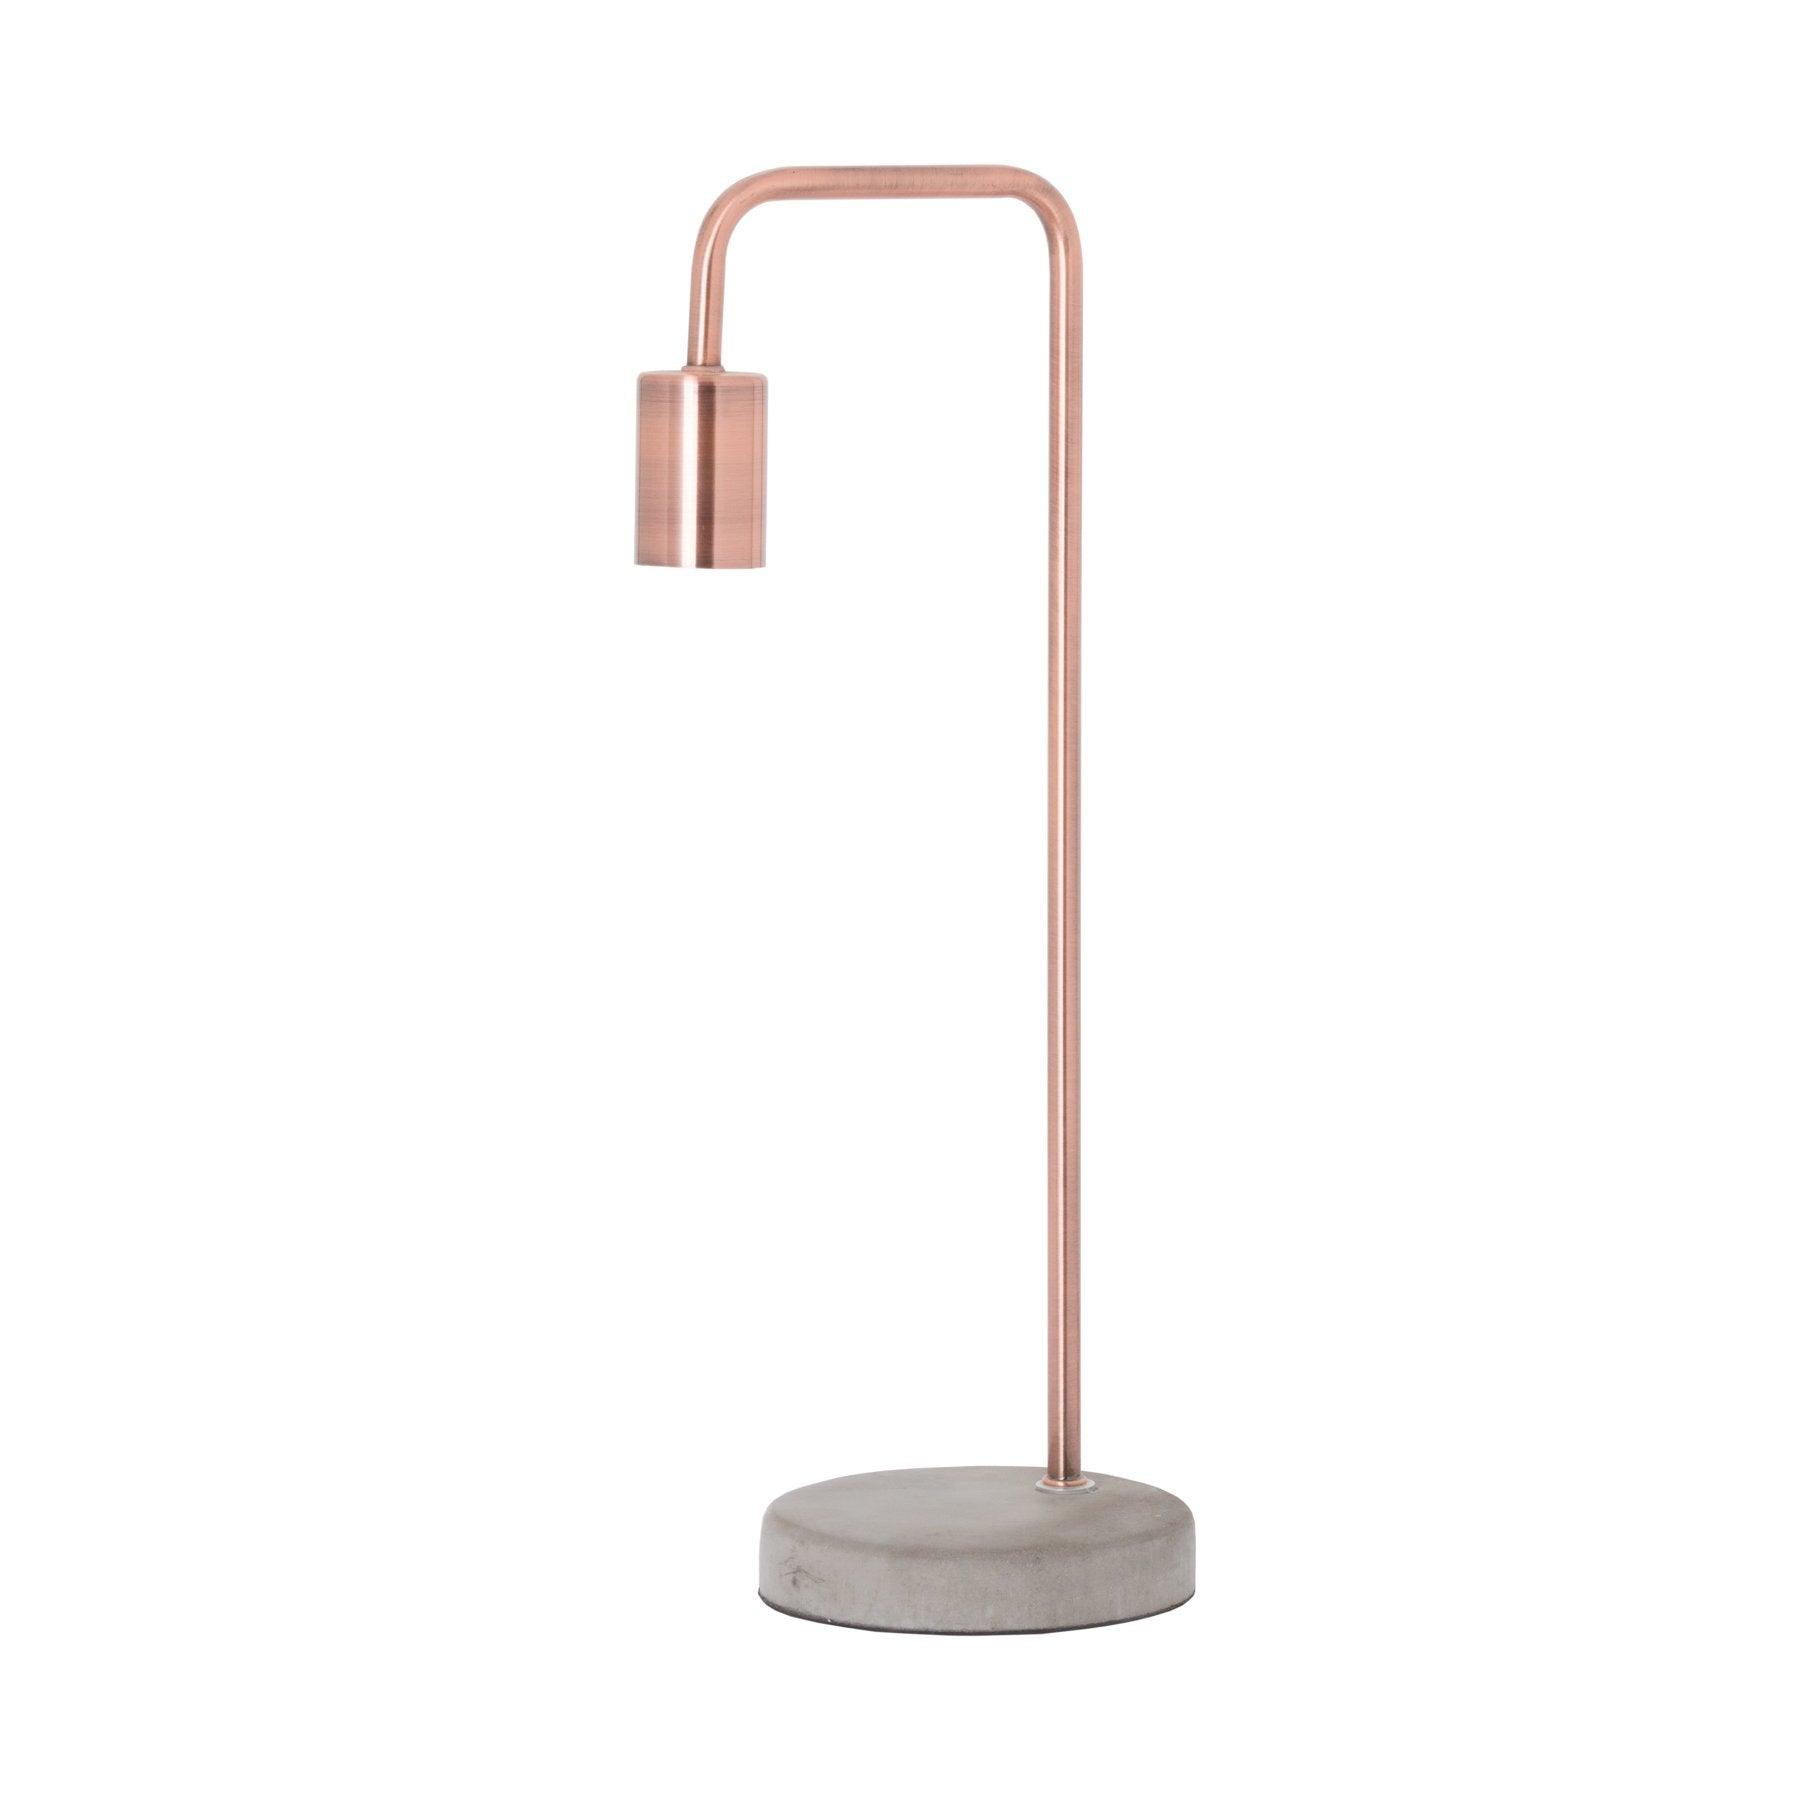 Copper Industrial Lamp With Stone Base - Vookoo Lifestyle